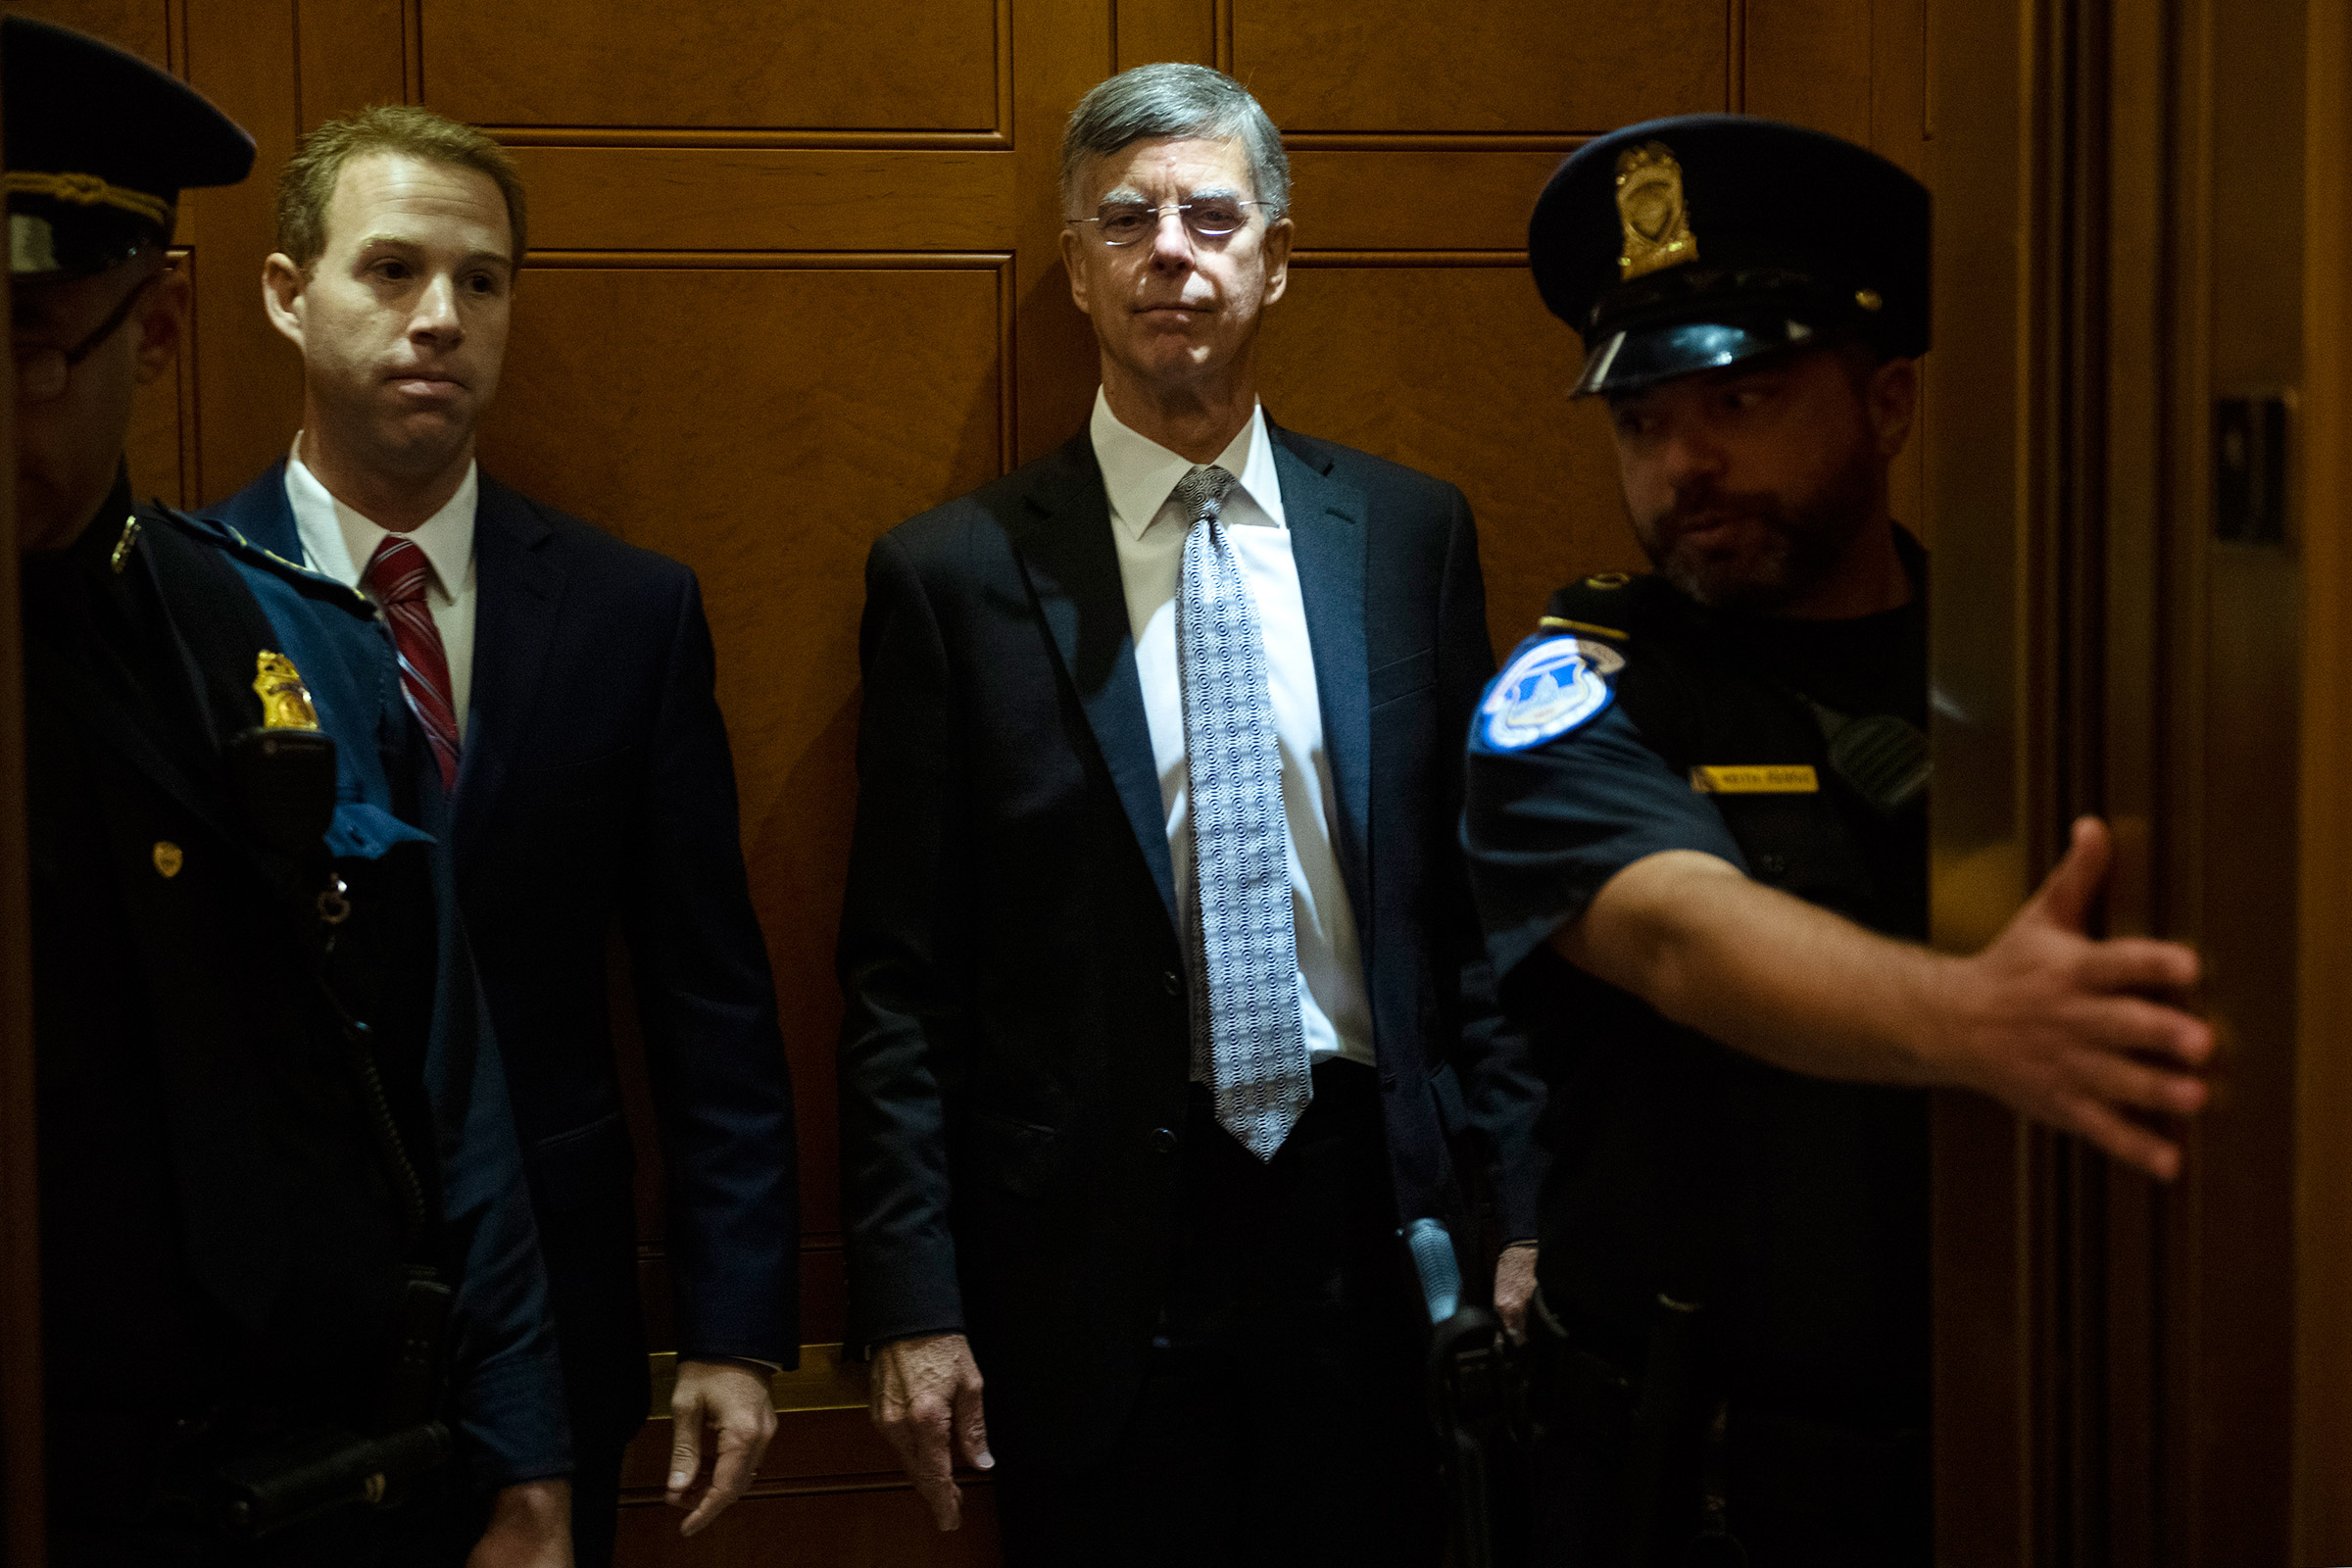 Bill Taylor, center, the acting U.S. ambassador to Ukraine, arrives at the Capitol for a deposition related to the House's impeachment inquiry on Oct. 22, 2019. (Tom Williams—CQ-Roll Call/Getty Images)